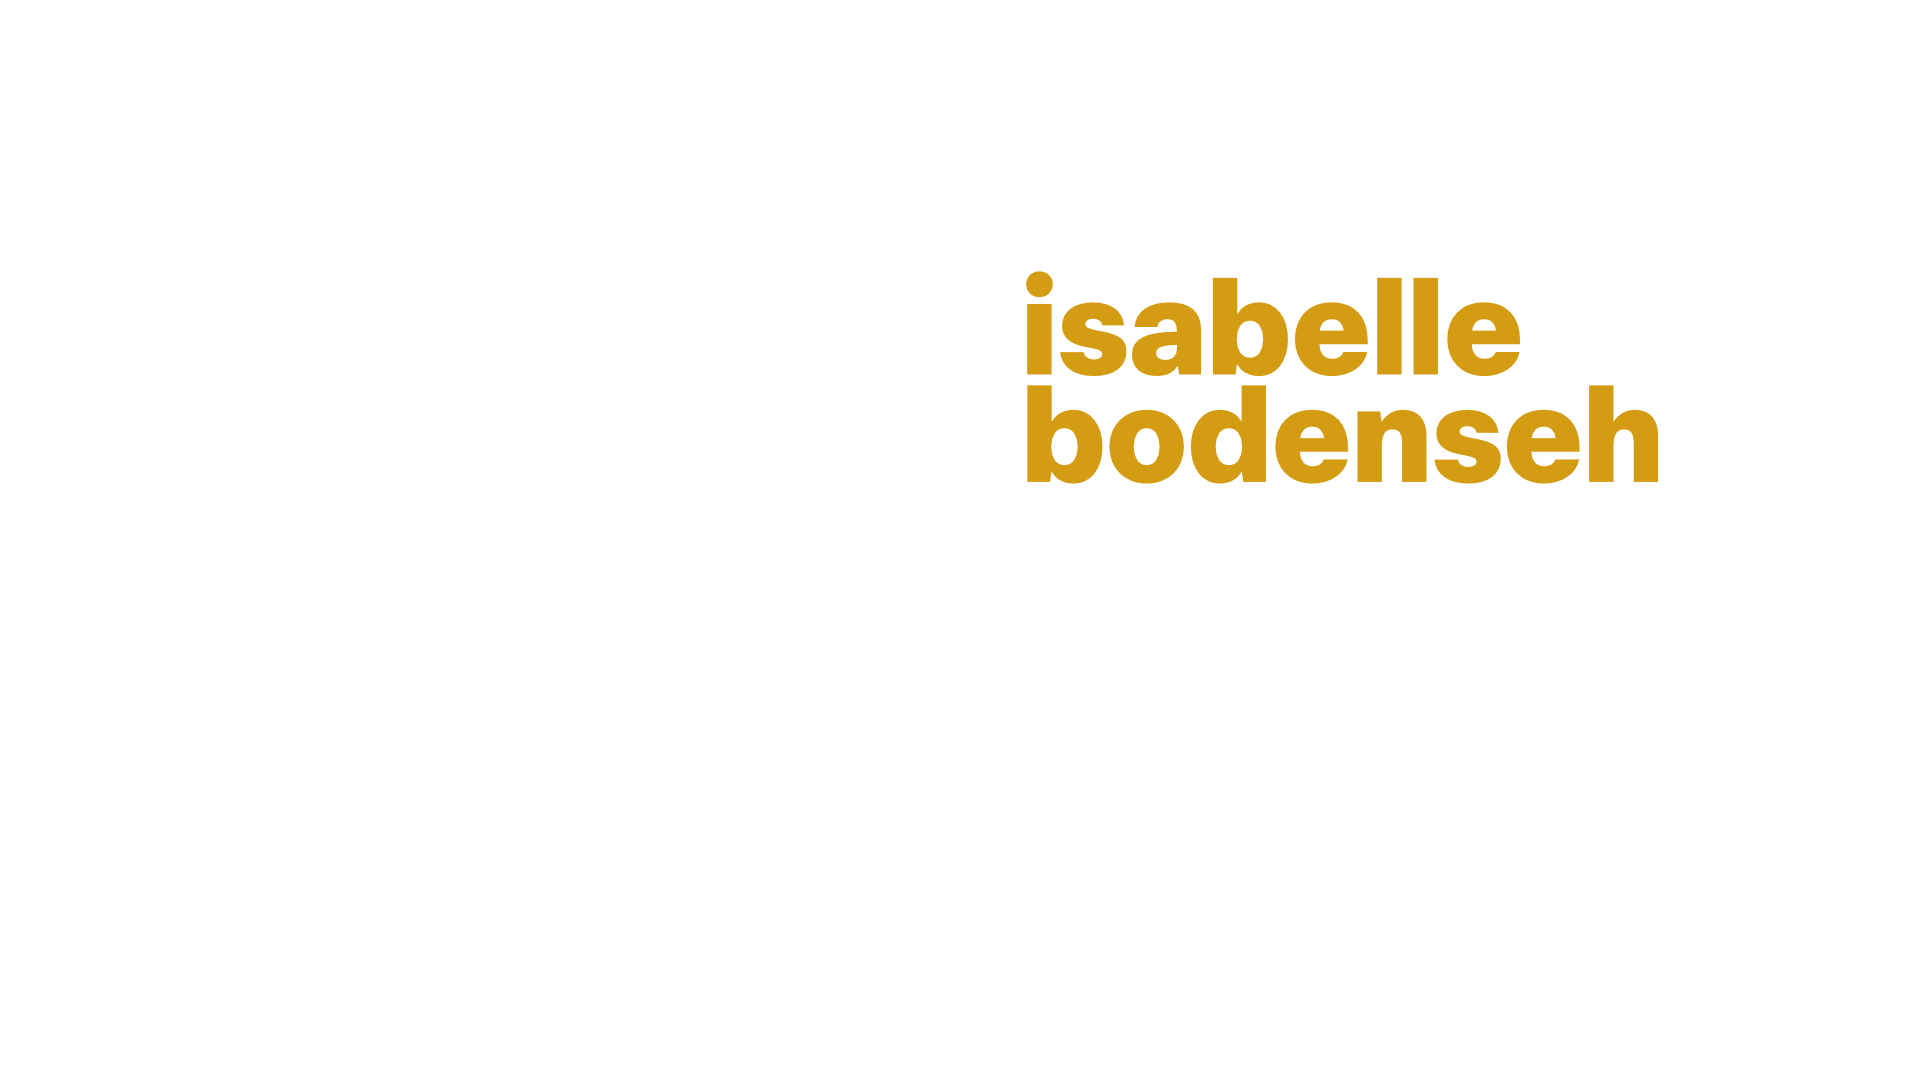 logo dignity isabelle bodenseh